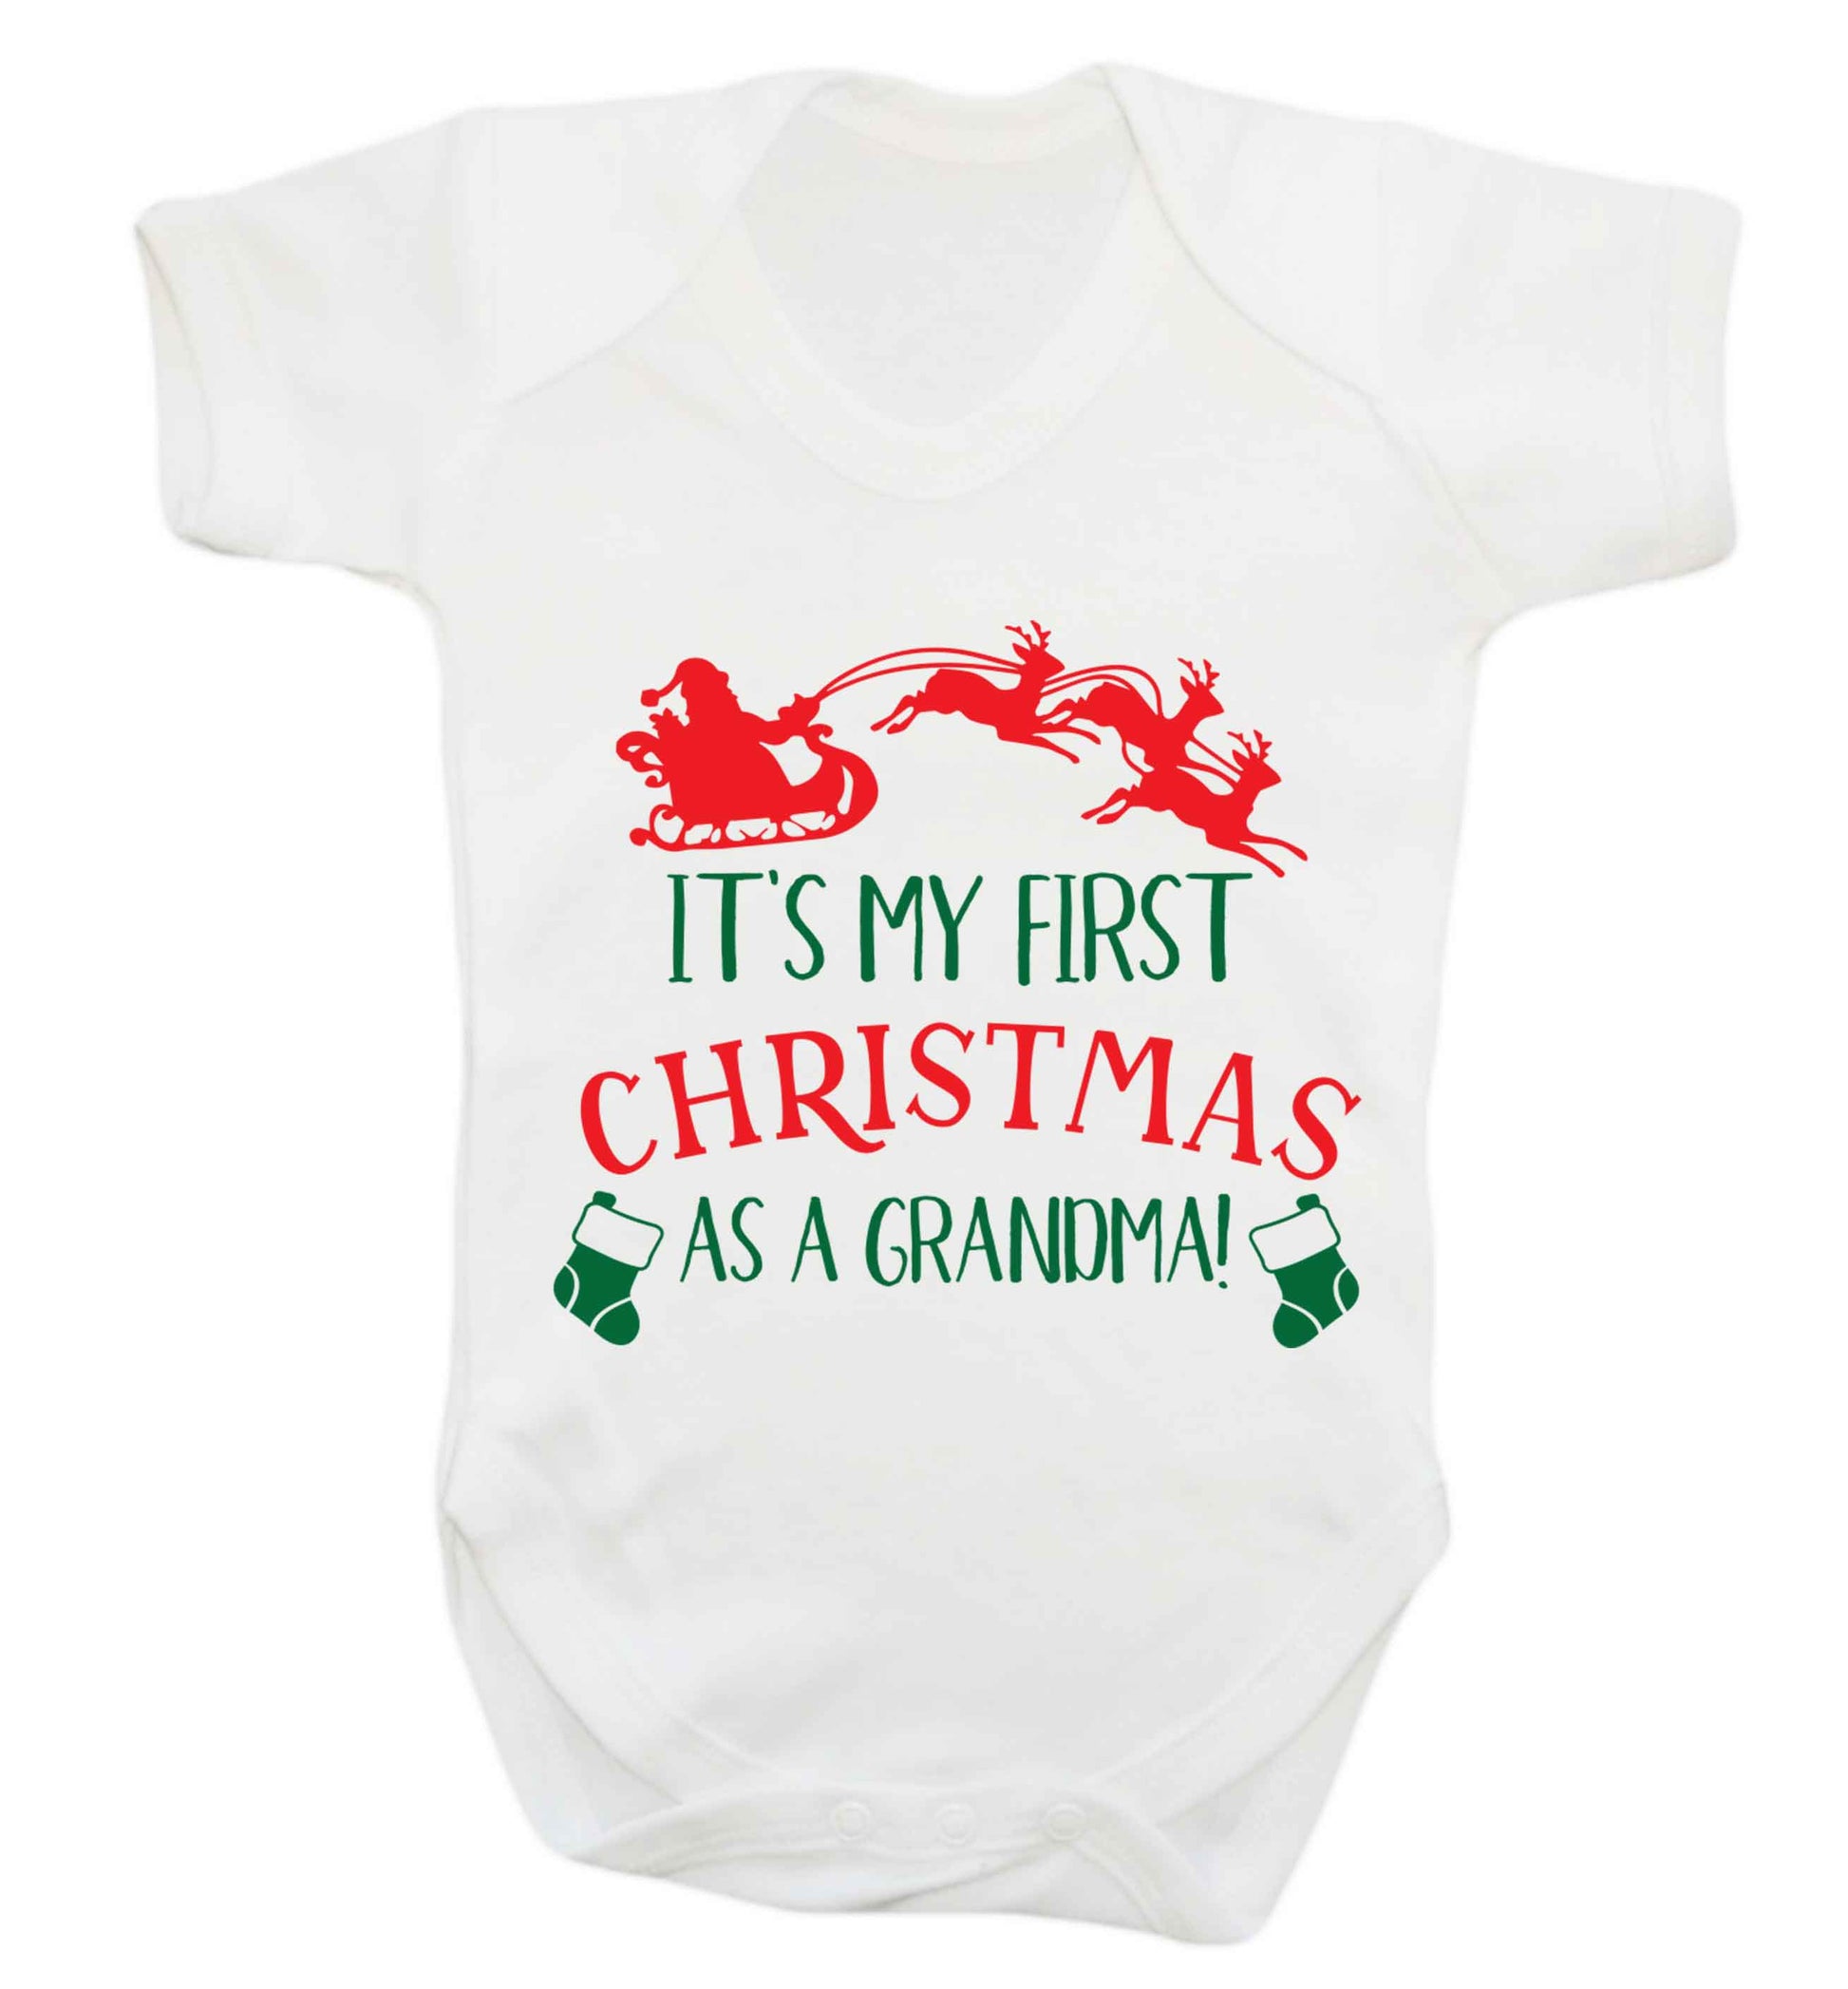 It's my first Christmas as a grandma! Baby Vest white 18-24 months